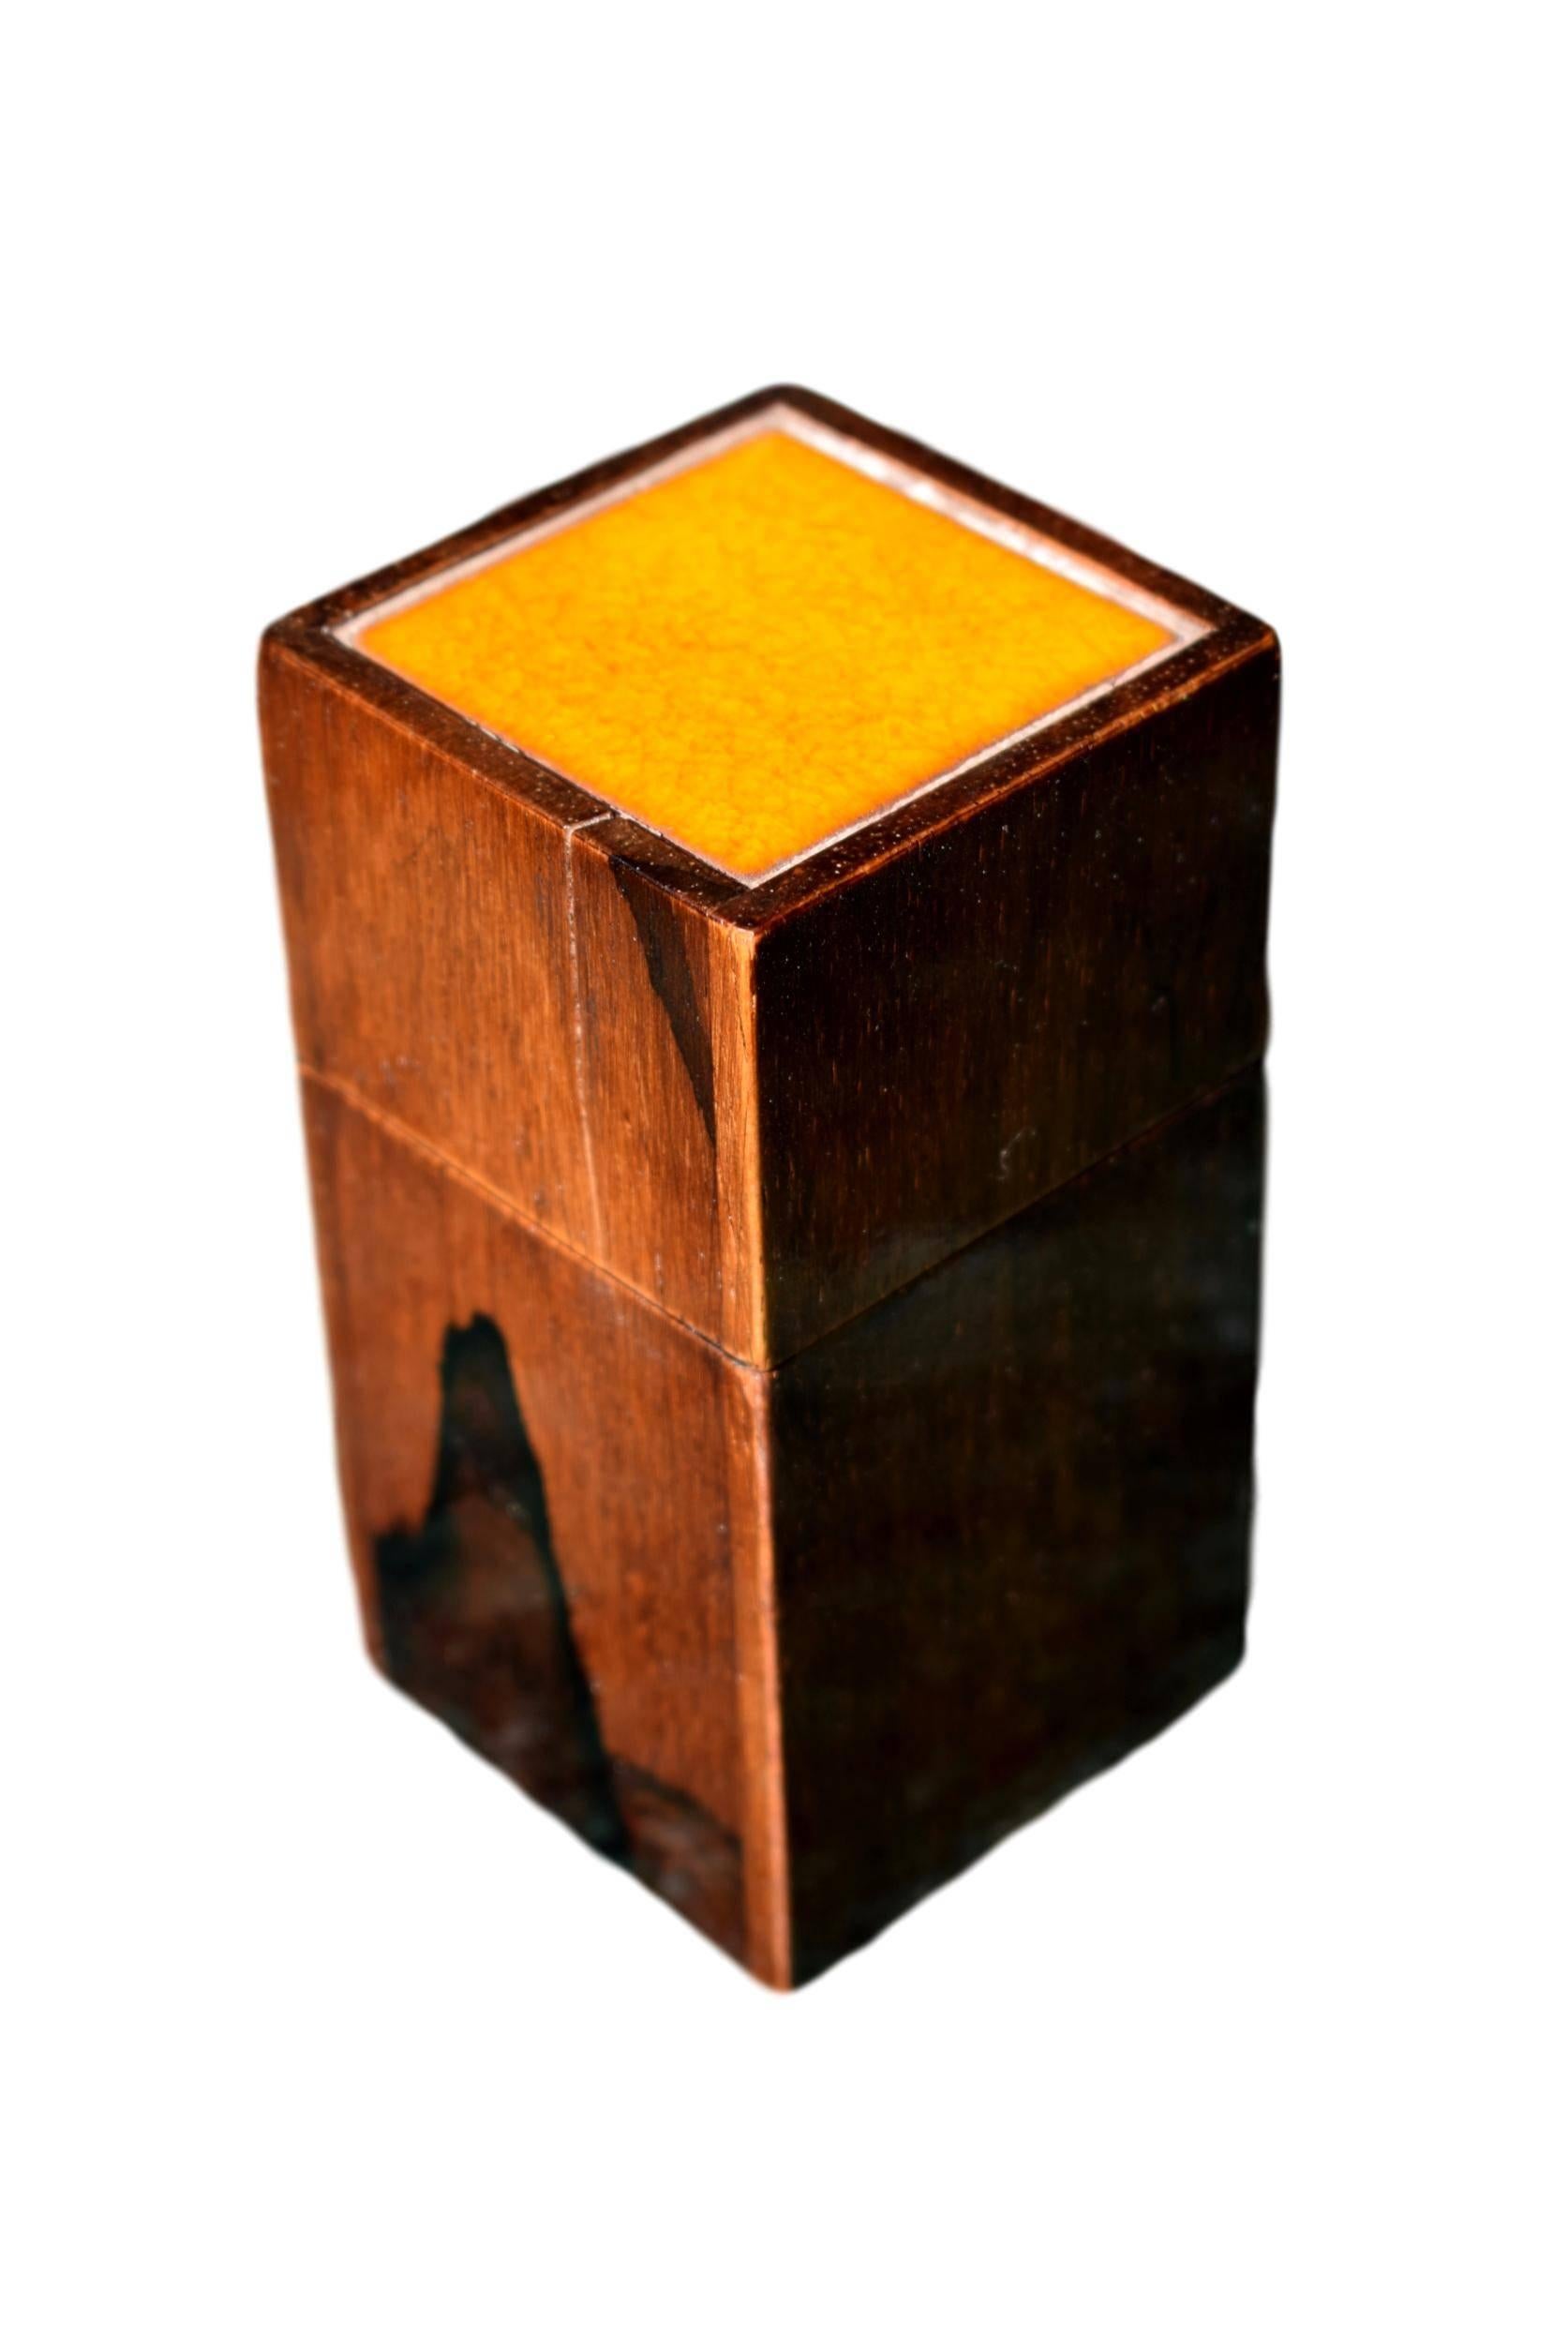 A unique Danish midcentury rosewood box by Alfred Klitgaard with decorative enamel by Danish artist Bodil Eje.

Stamped 